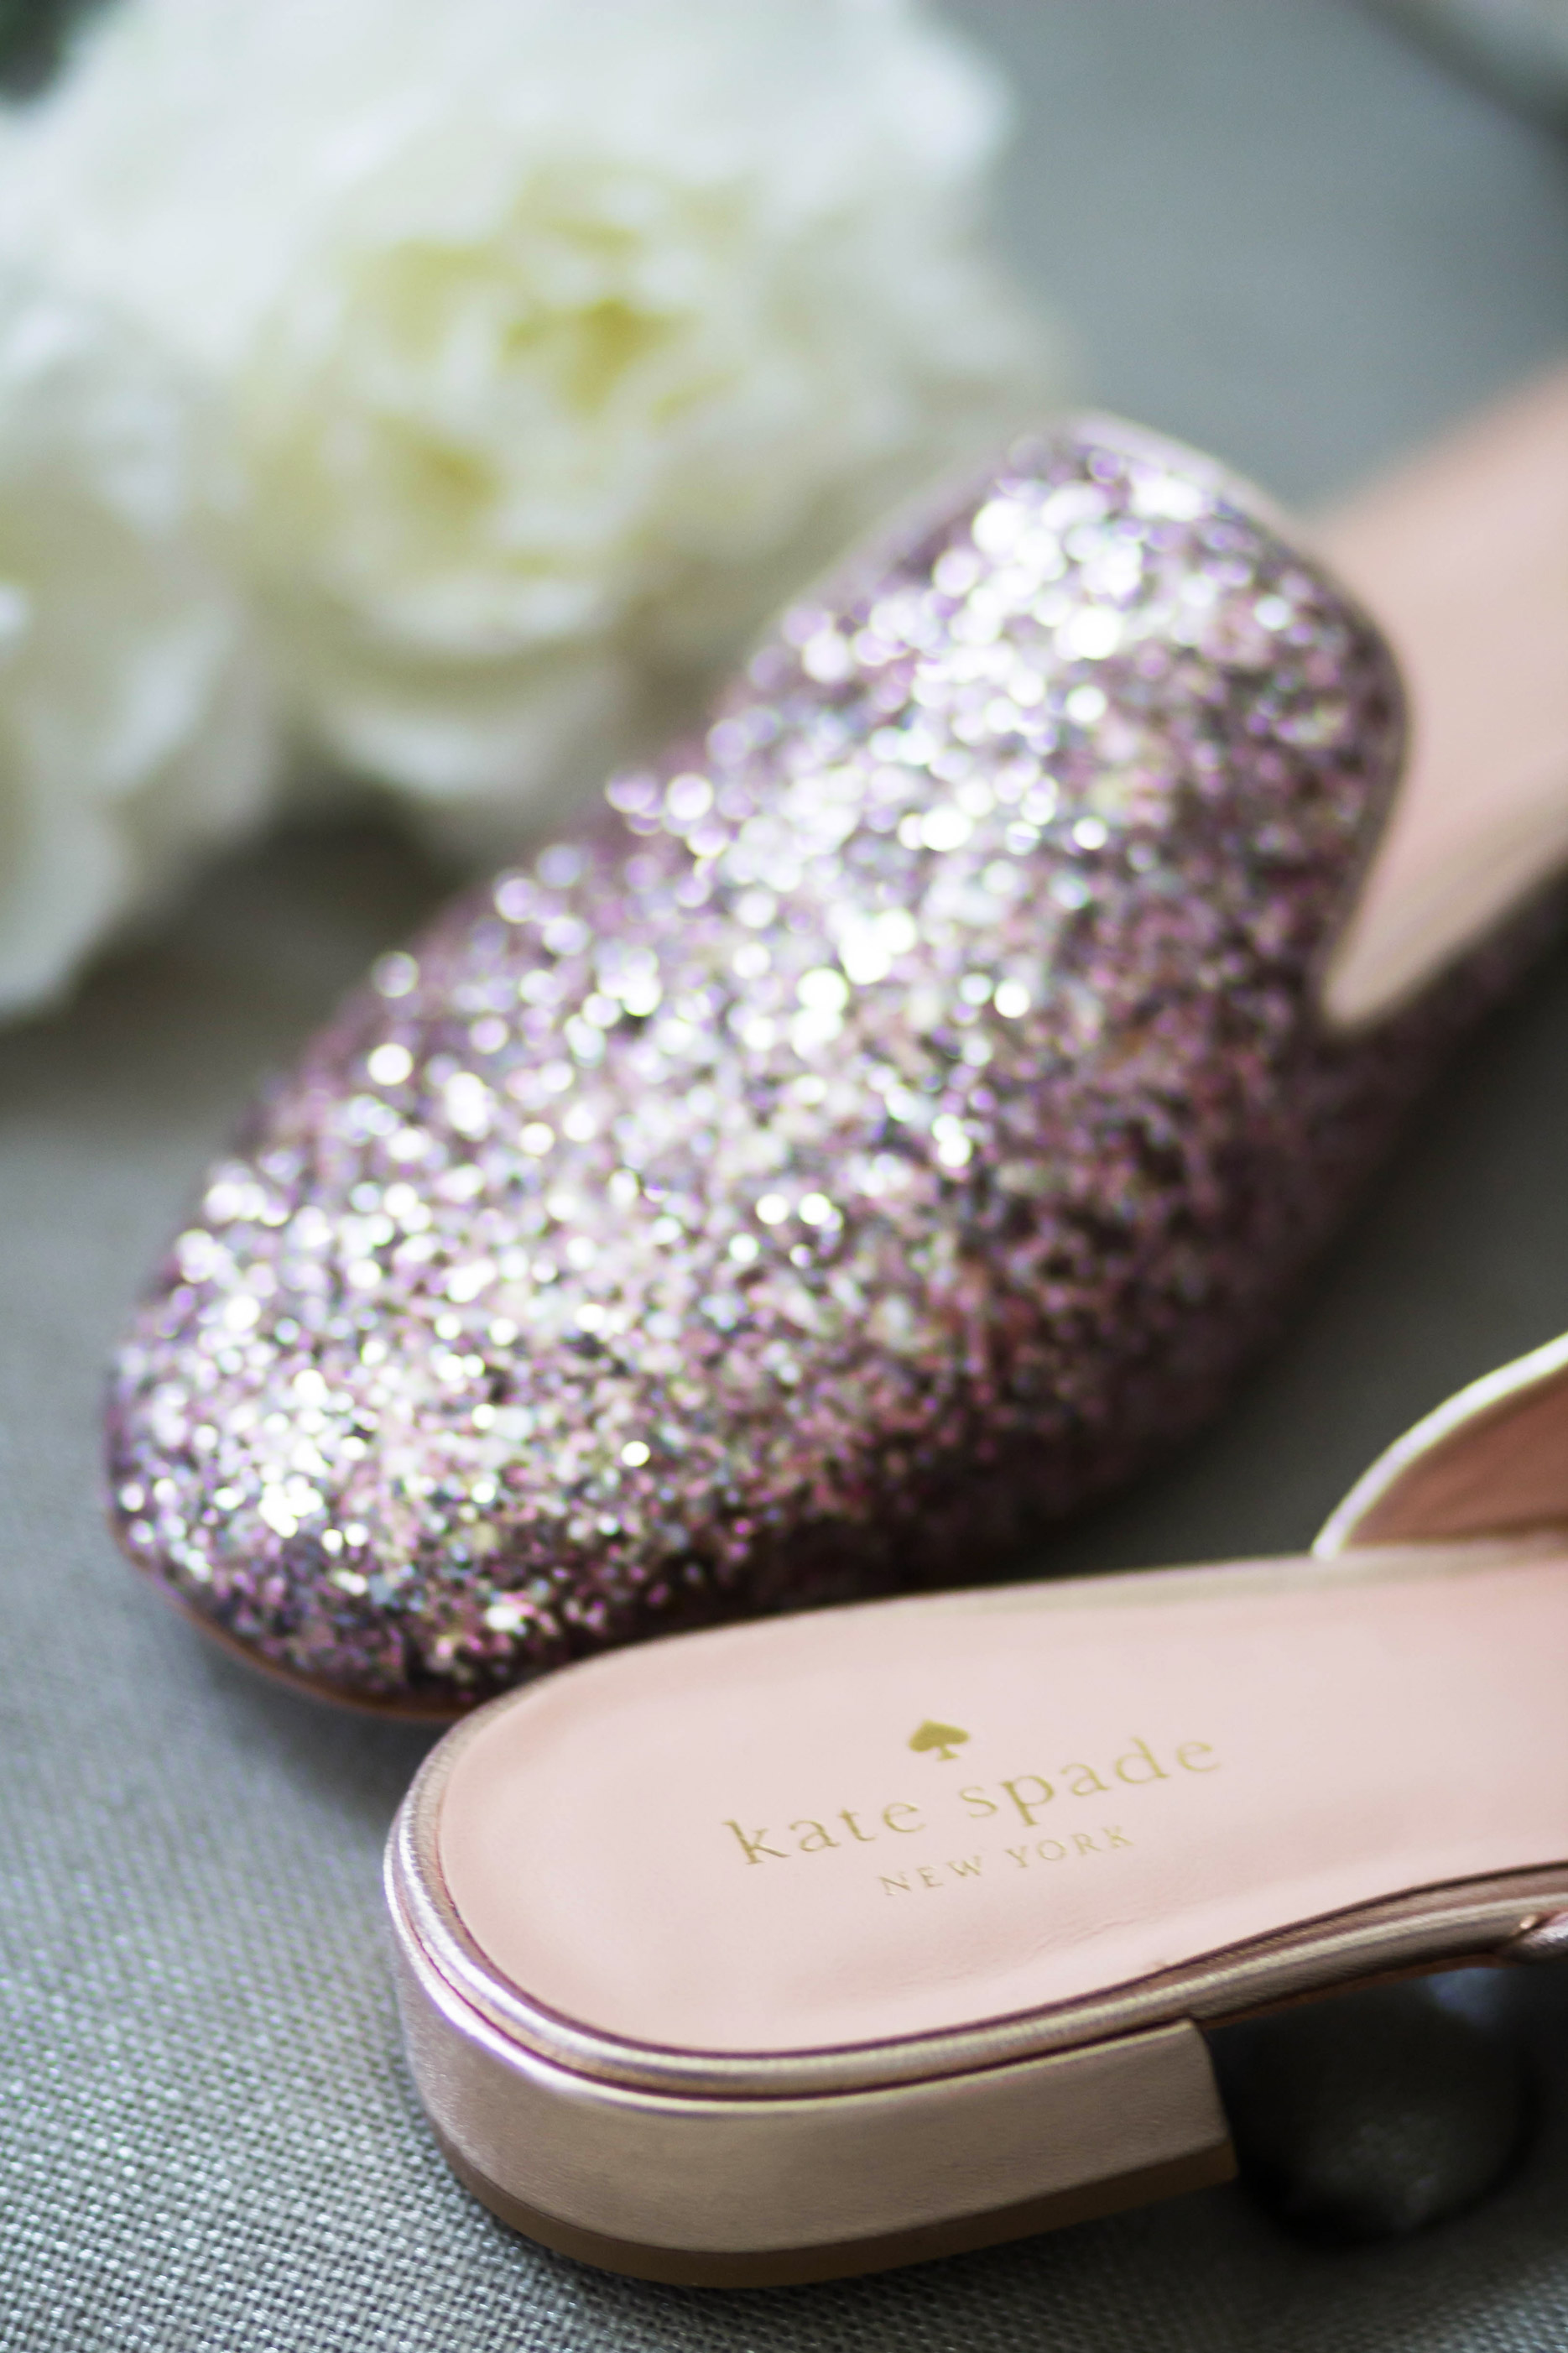 The Perfect Glitter Loafers for Spring